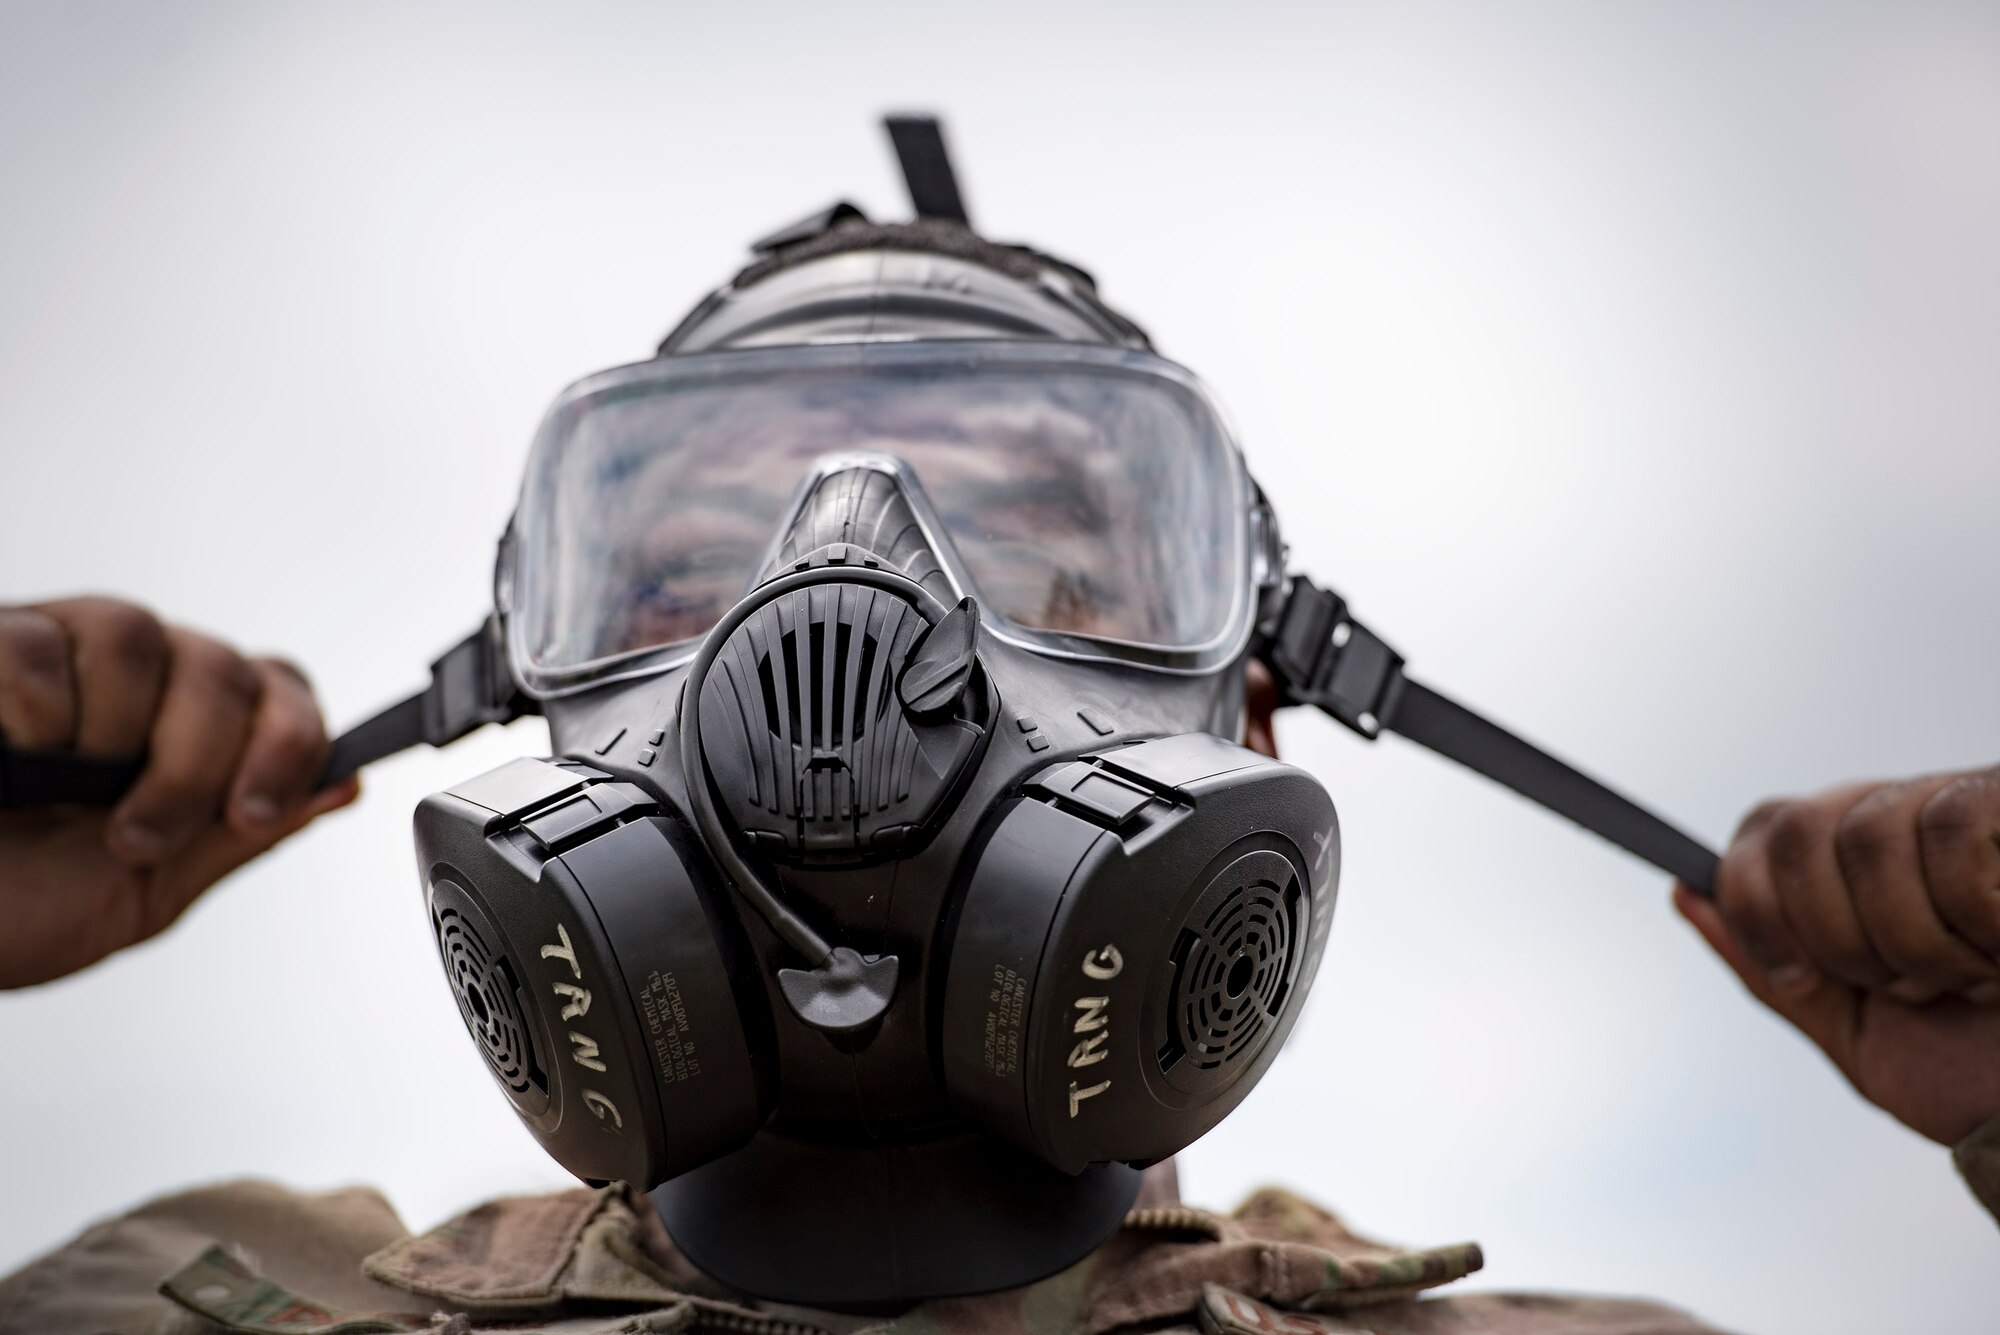 U.S. Air Force Senior Airman Eric Purnell, 823d Base Defense Squadron fireteam member, tightens a gas mask, April 13, 2016, Avon Park Air Force Range, Fla. Part of the obstacle course challenge involved dressing in full mission-oriented-protective-posture gear and being cleared by cadre before moving on to the next obstacle. (U.S. Air Force photo by Airman 1st Class Janiqua P. Robinson/Released)